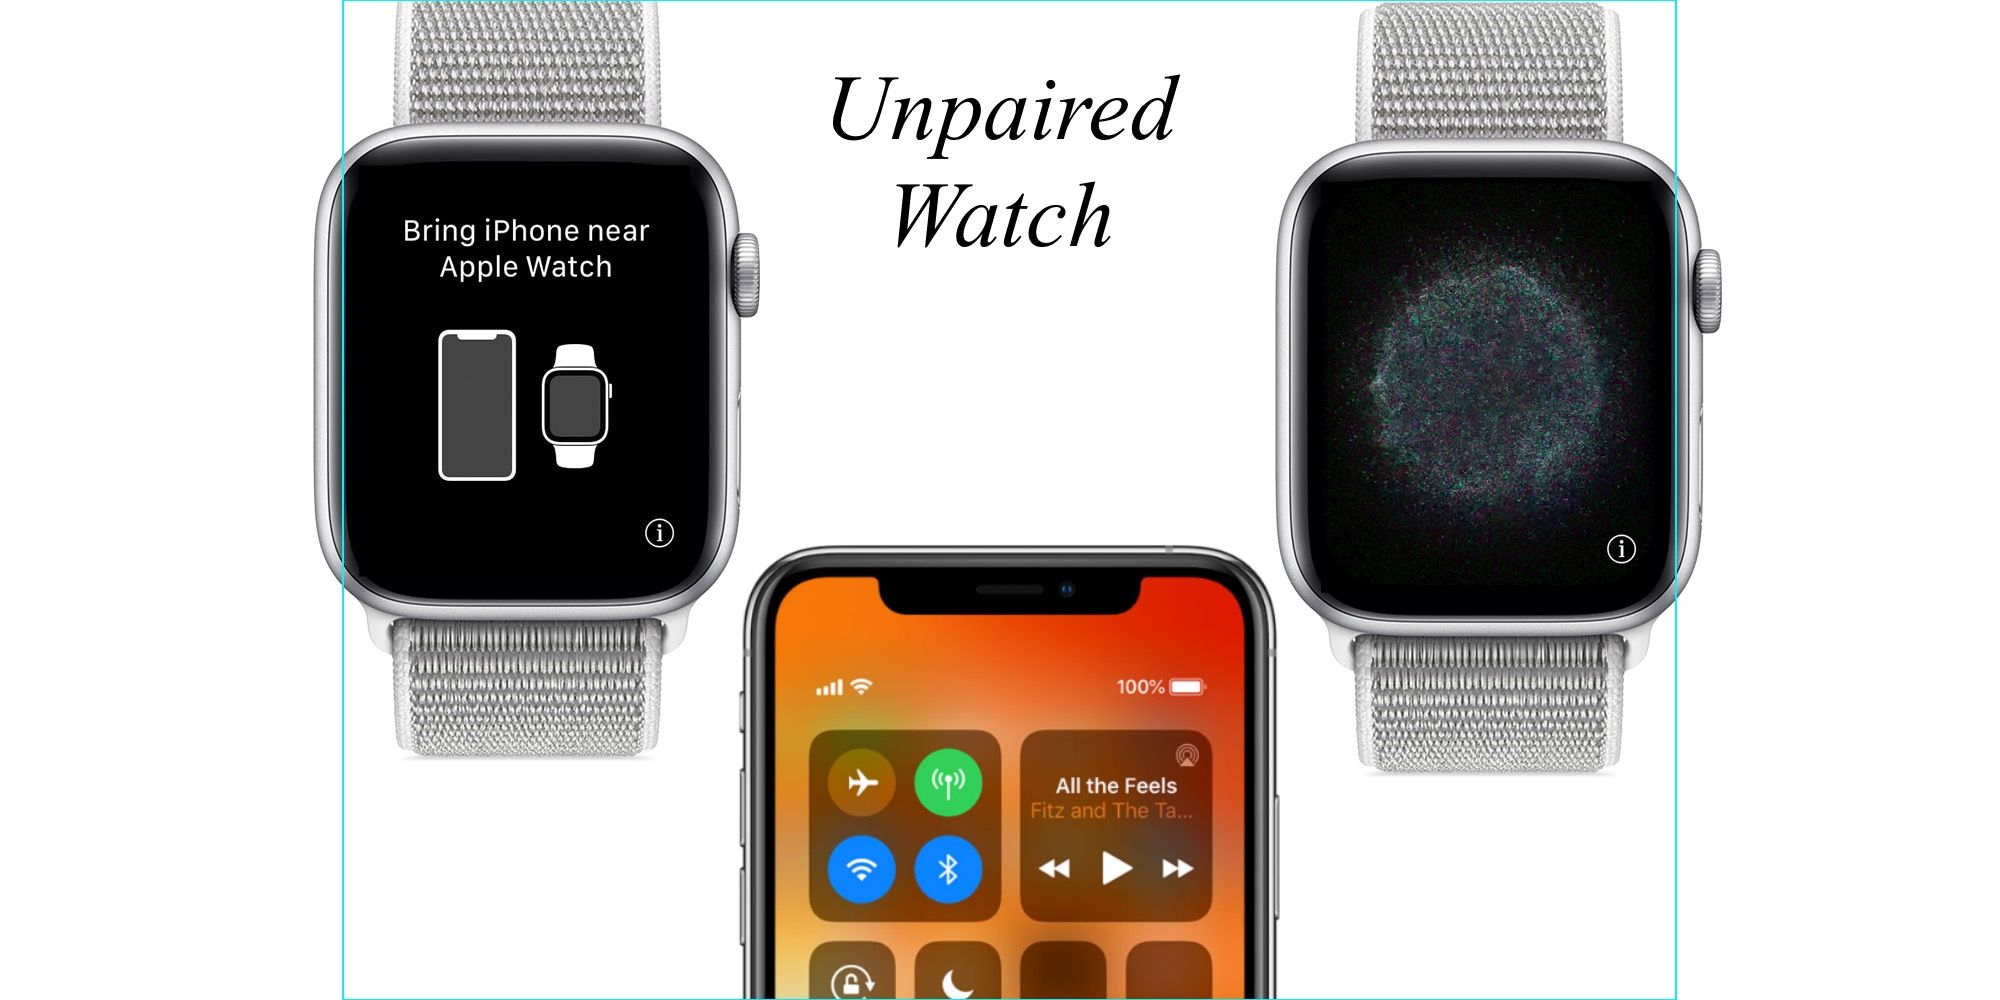 An unpaired Apple Watch next to an iPhone